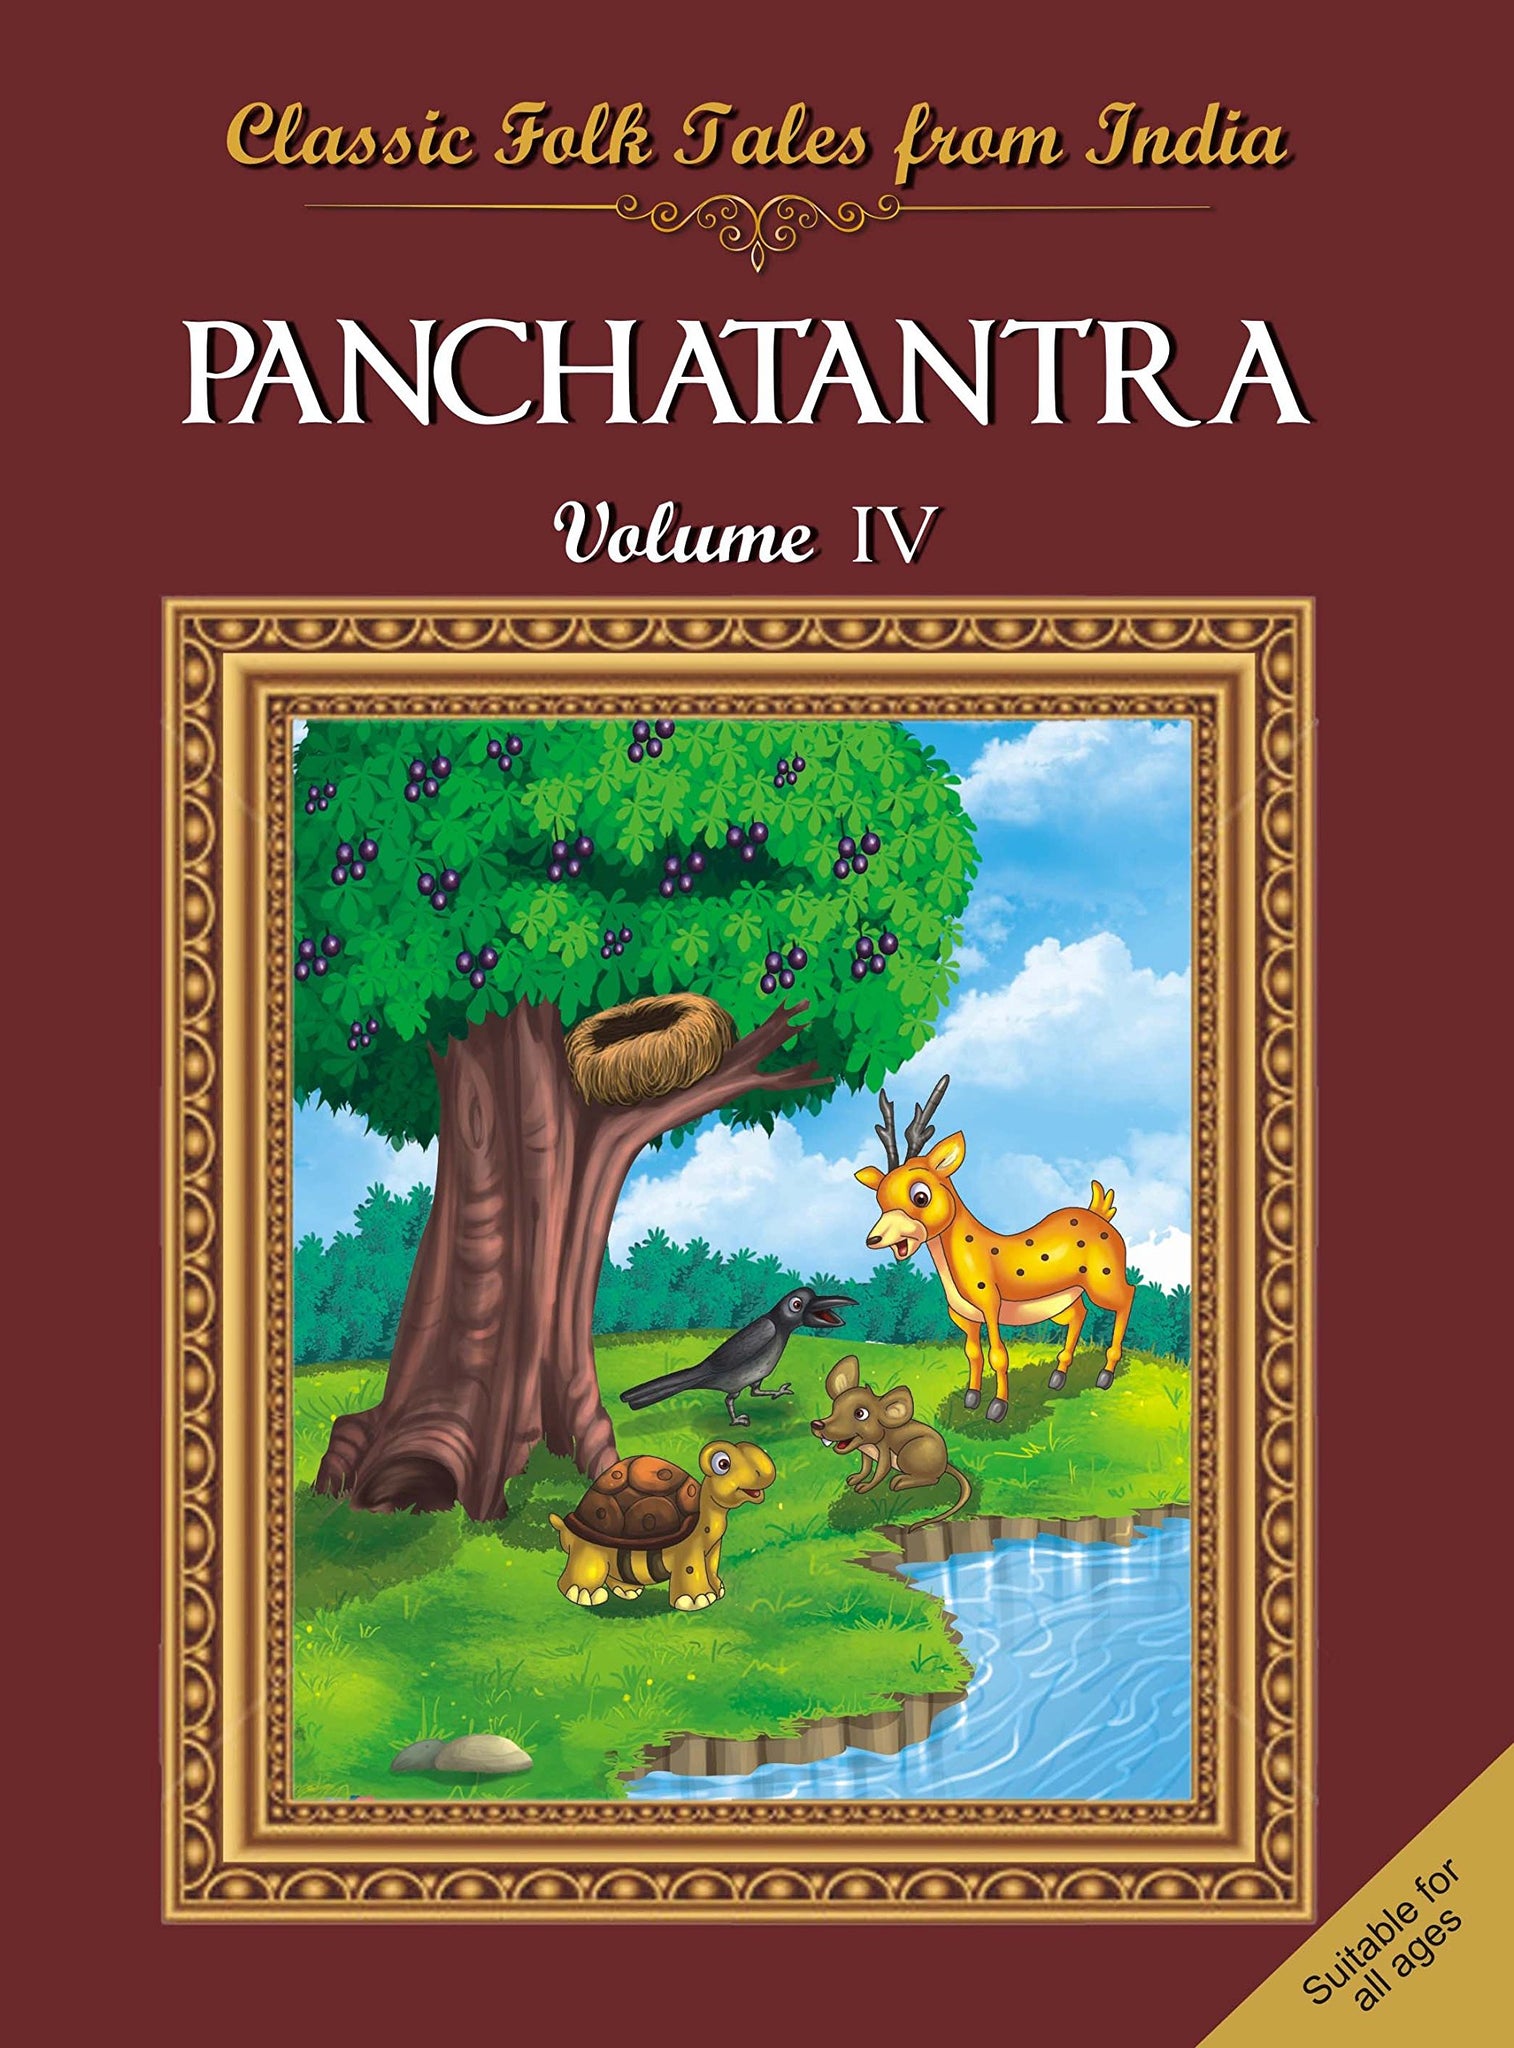 Classic Folk TalesFrom India :Panchatantra Vol IV